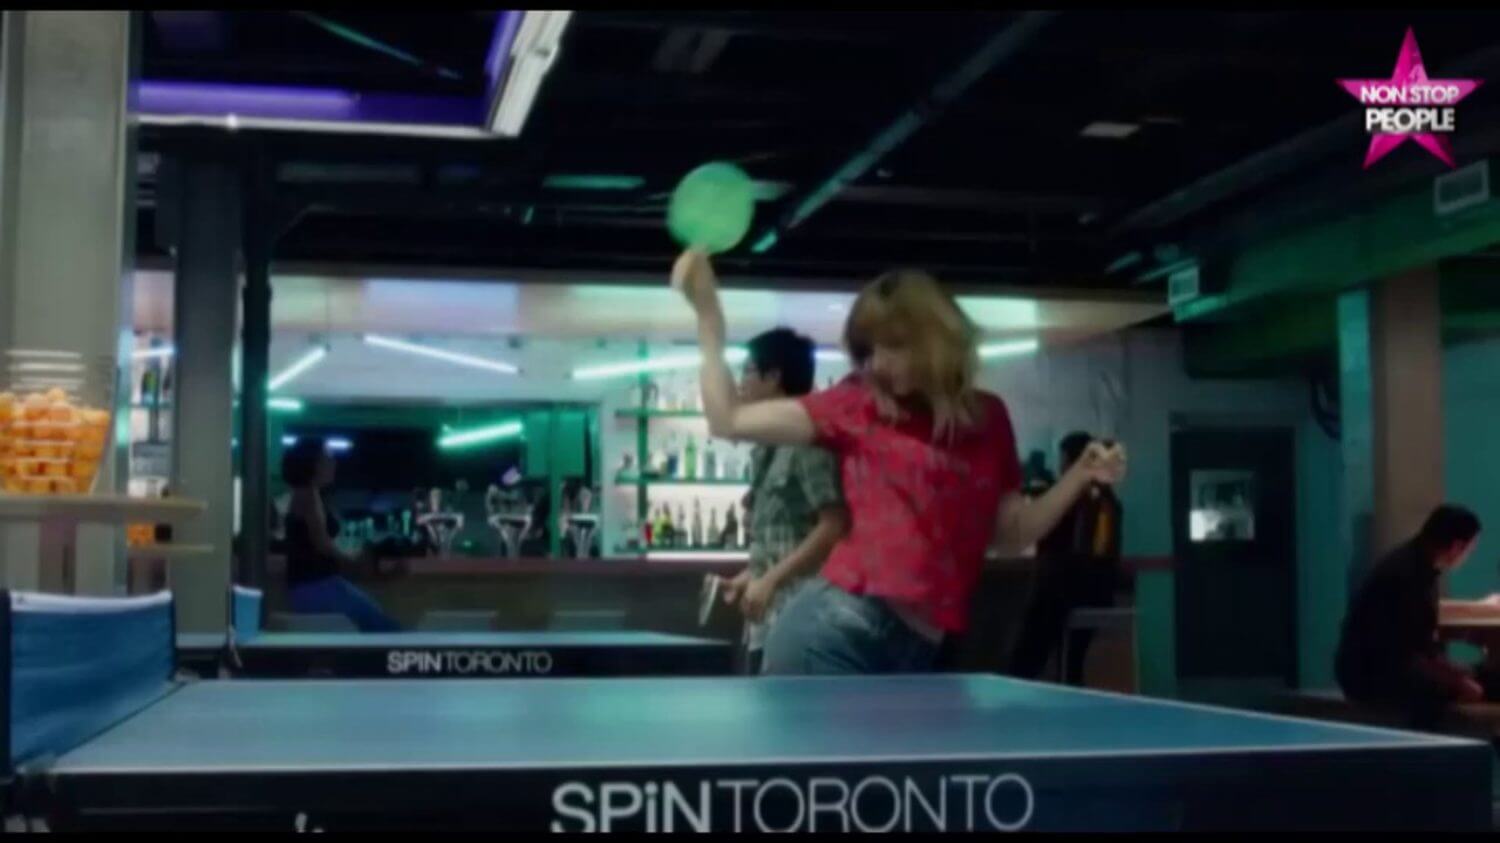 Spin Toronto - What If with Daniel Radcliffe